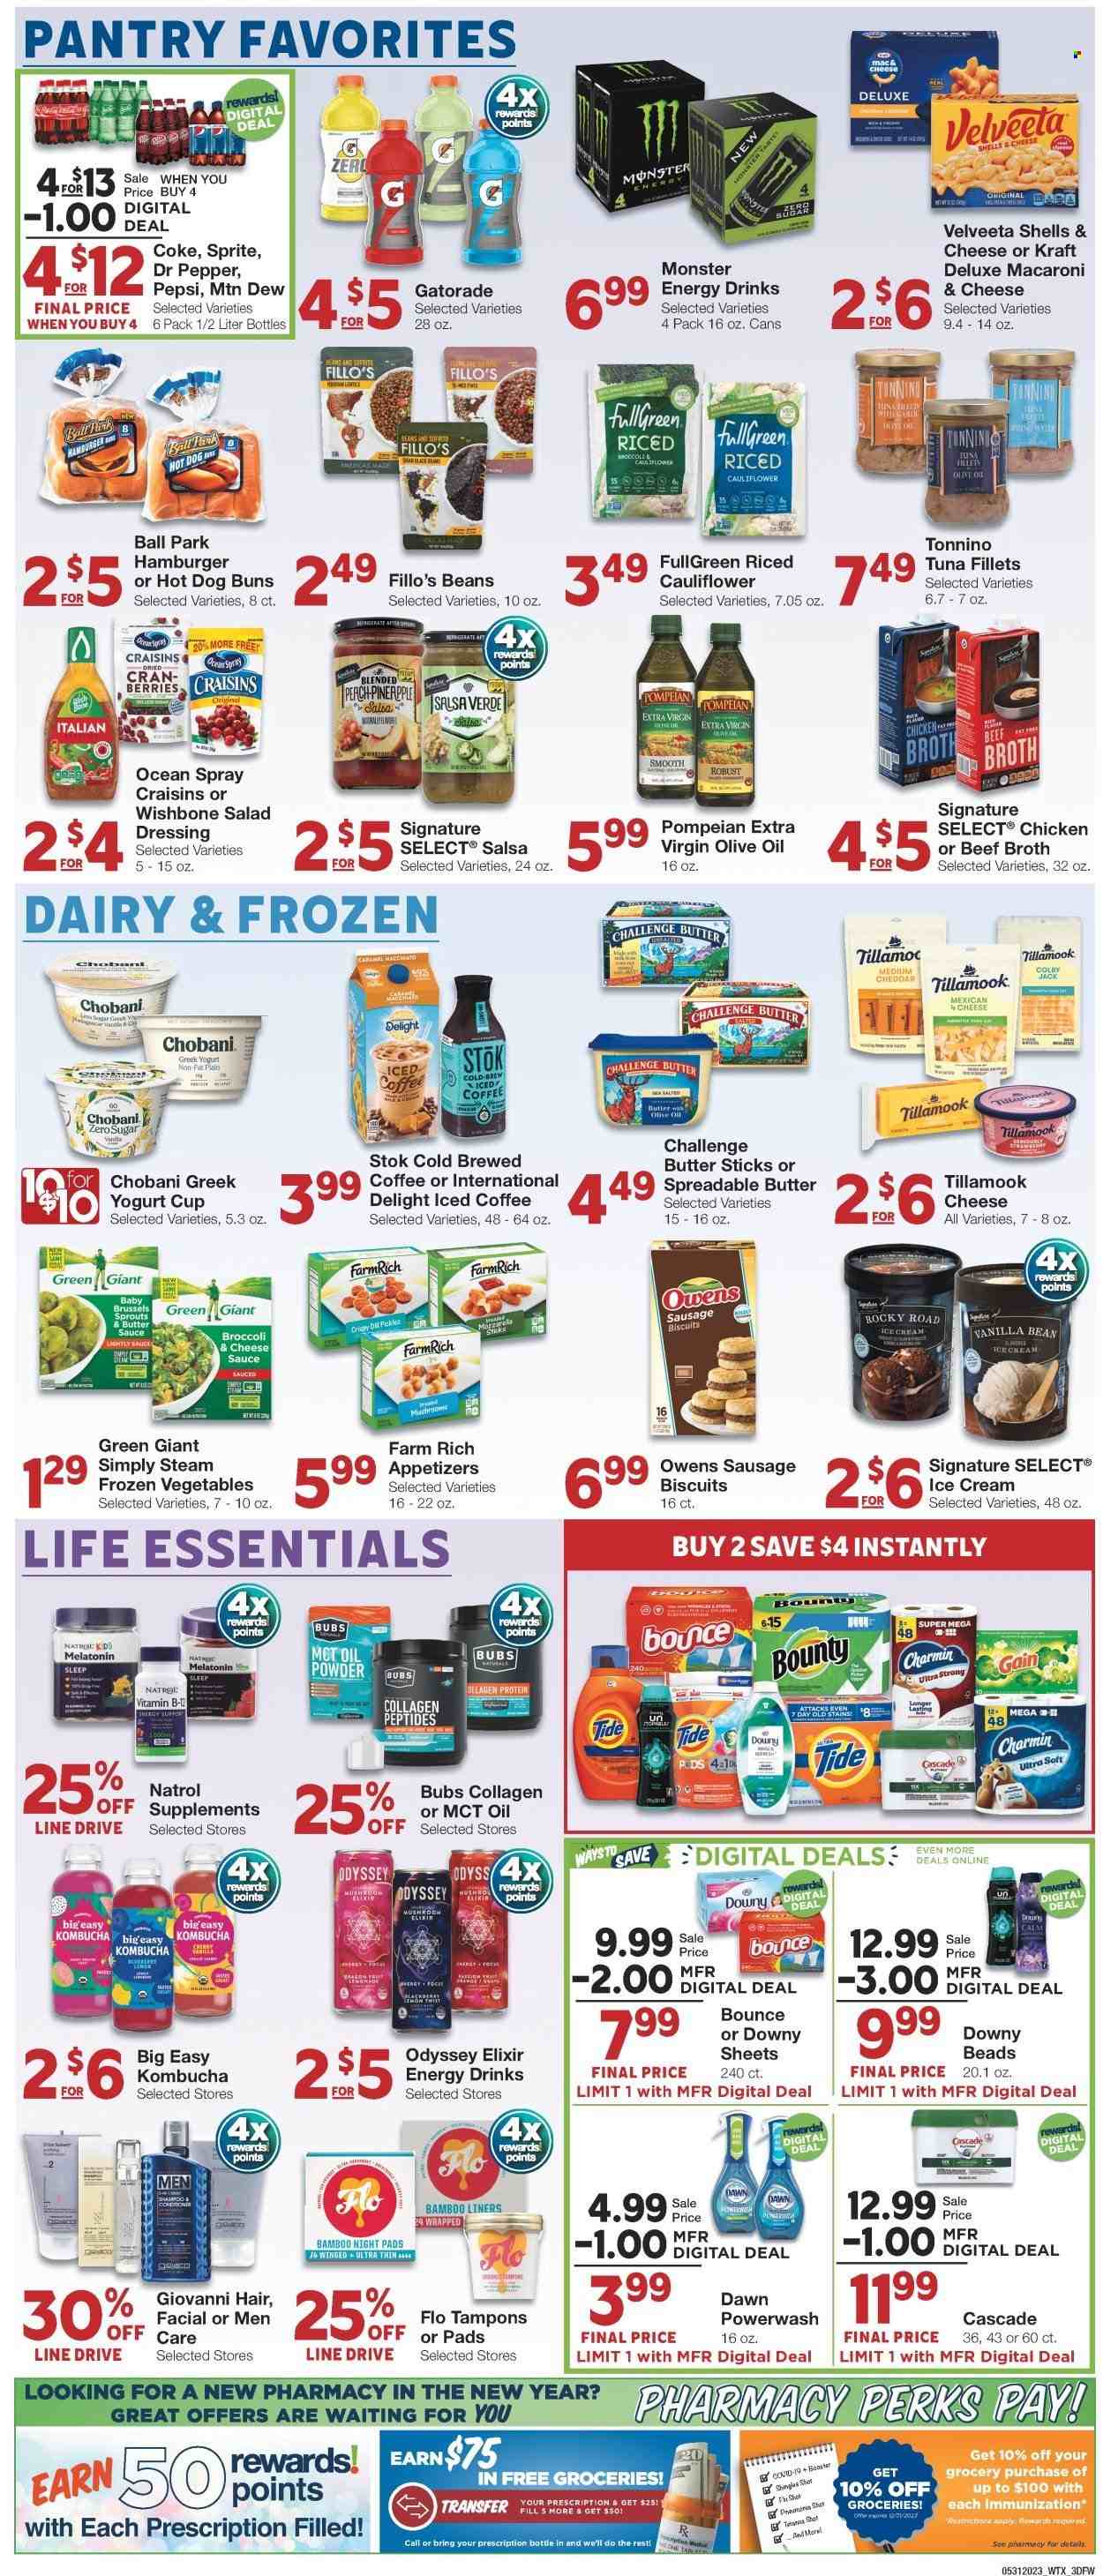 thumbnail - Market Street Flyer - 05/31/2023 - 06/06/2023 - Sales products - mushrooms, buns, broccoli, pineapple, cherries, tuna, perch, macaroni & cheese, Kraft®, ready meal, sausage, Colby cheese, greek yoghurt, Chobani, spreadable butter, ice cream, frozen vegetables, Bounty, biscuit, beef broth, chicken broth, broth, black beans, craisins, pickles, caramel, salad dressing, dressing, salsa, extra virgin olive oil, olive oil, dried fruit, Coca-Cola, Mountain Dew, Sprite, Pepsi, energy drink, Monster, Dr. Pepper, soft drink, Monster Energy, Gatorade, Coke, iced coffee, kombucha, Charmin, Gain, Cascade, Tide, Downy Laundry, tampons, Natrol, electrolyte drink. Page 3.